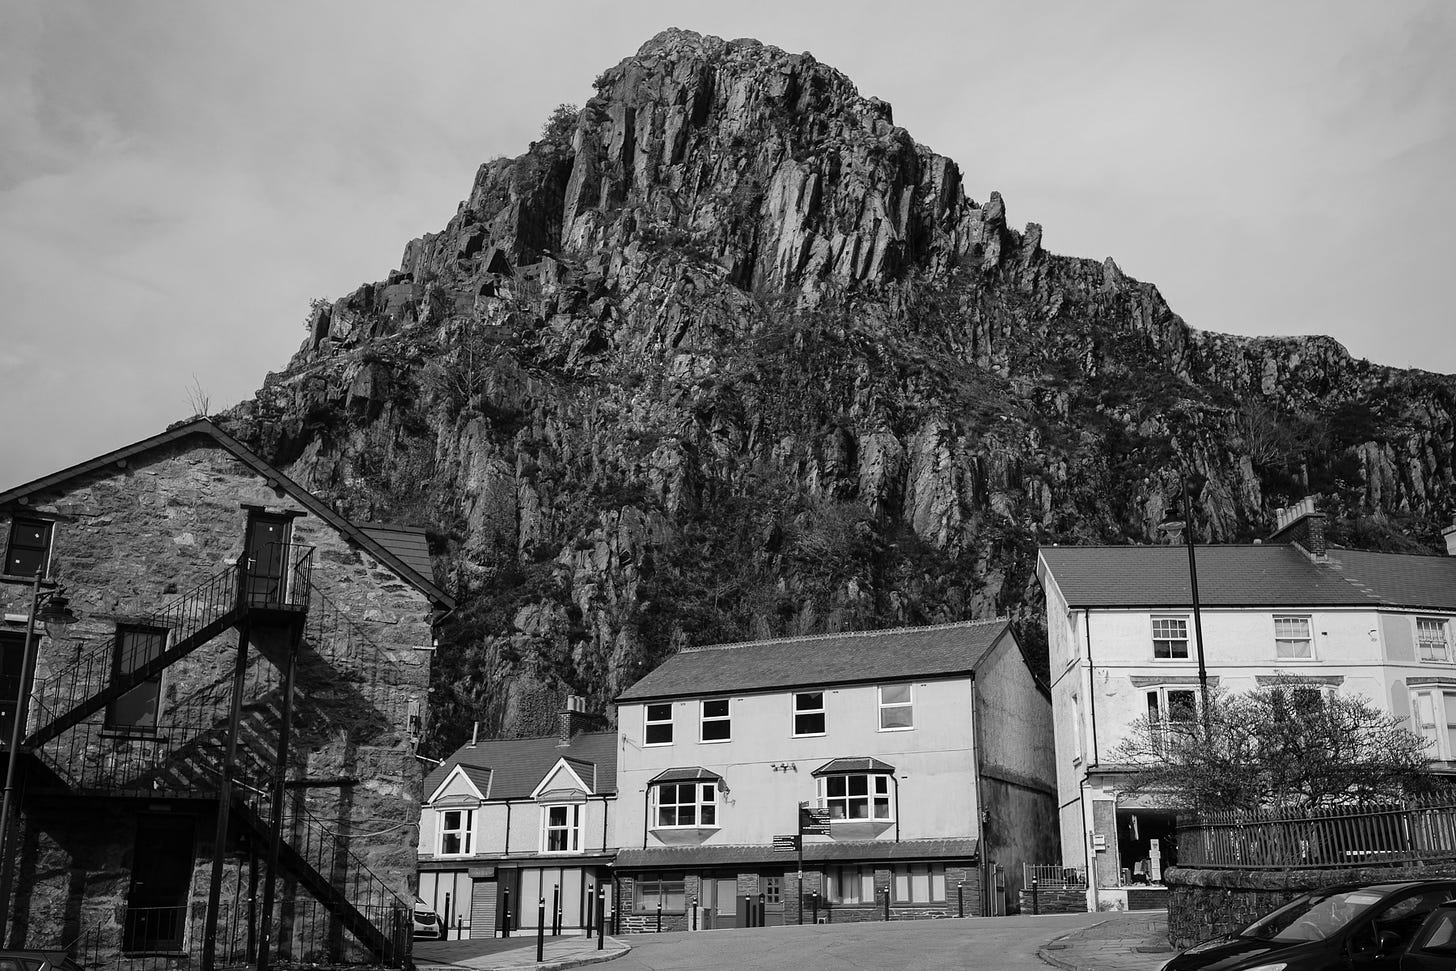 Black and white photograph of a jagged rocky mountain towering over white houses